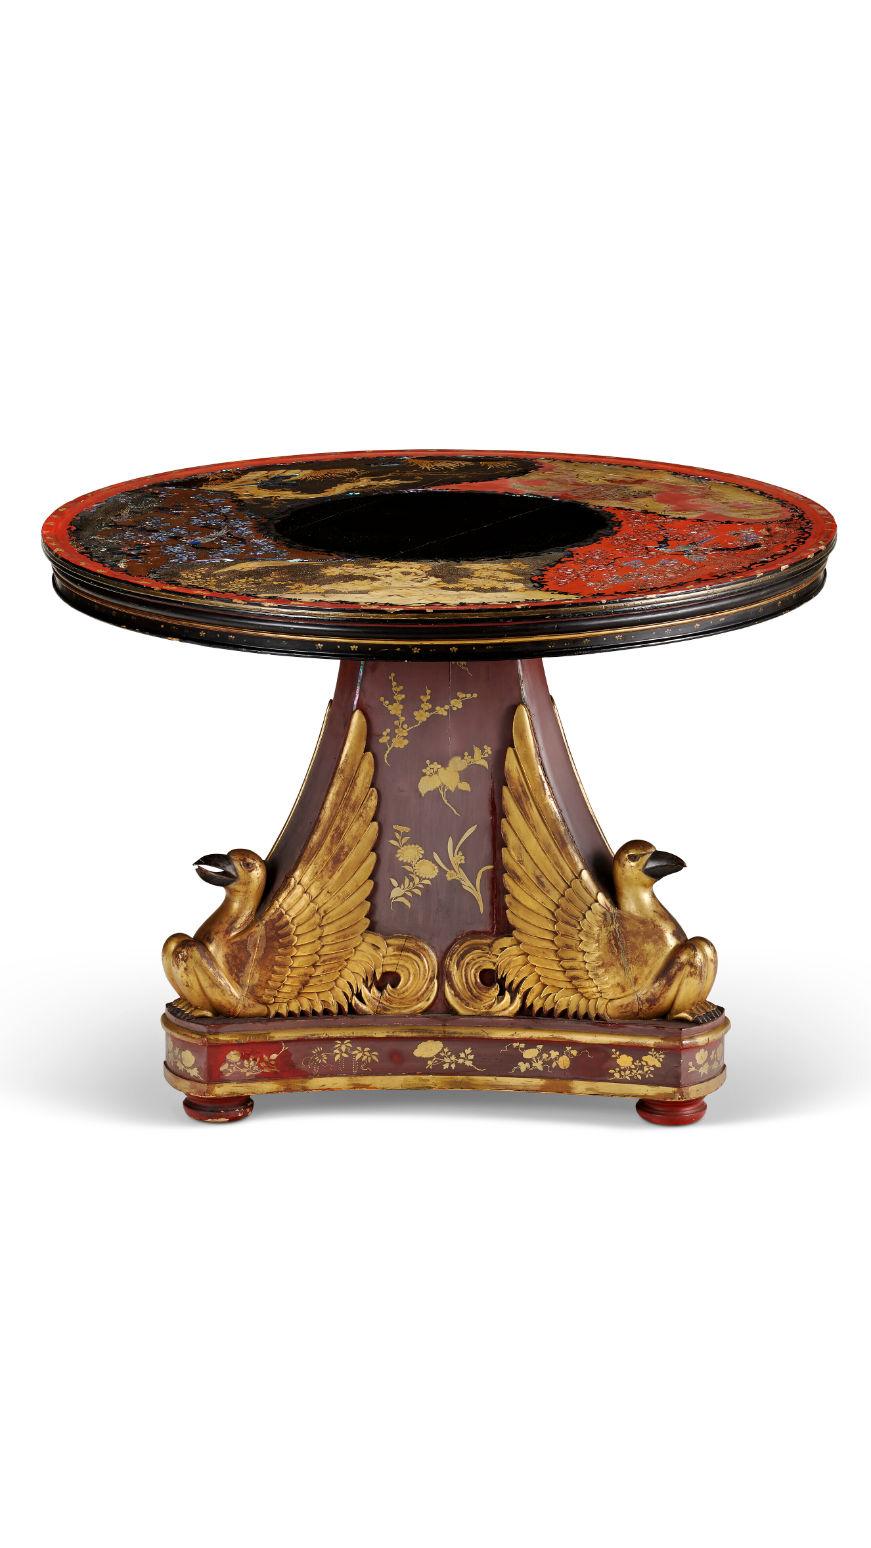 Our unique table has a round Japanese top distinguished by its Nagasaki raden inlaid designs of peacocks, pheasants and cranes among flower branches. It is mounted on a tripod shaped pedestal of northern European origin, likely Swedish or German,